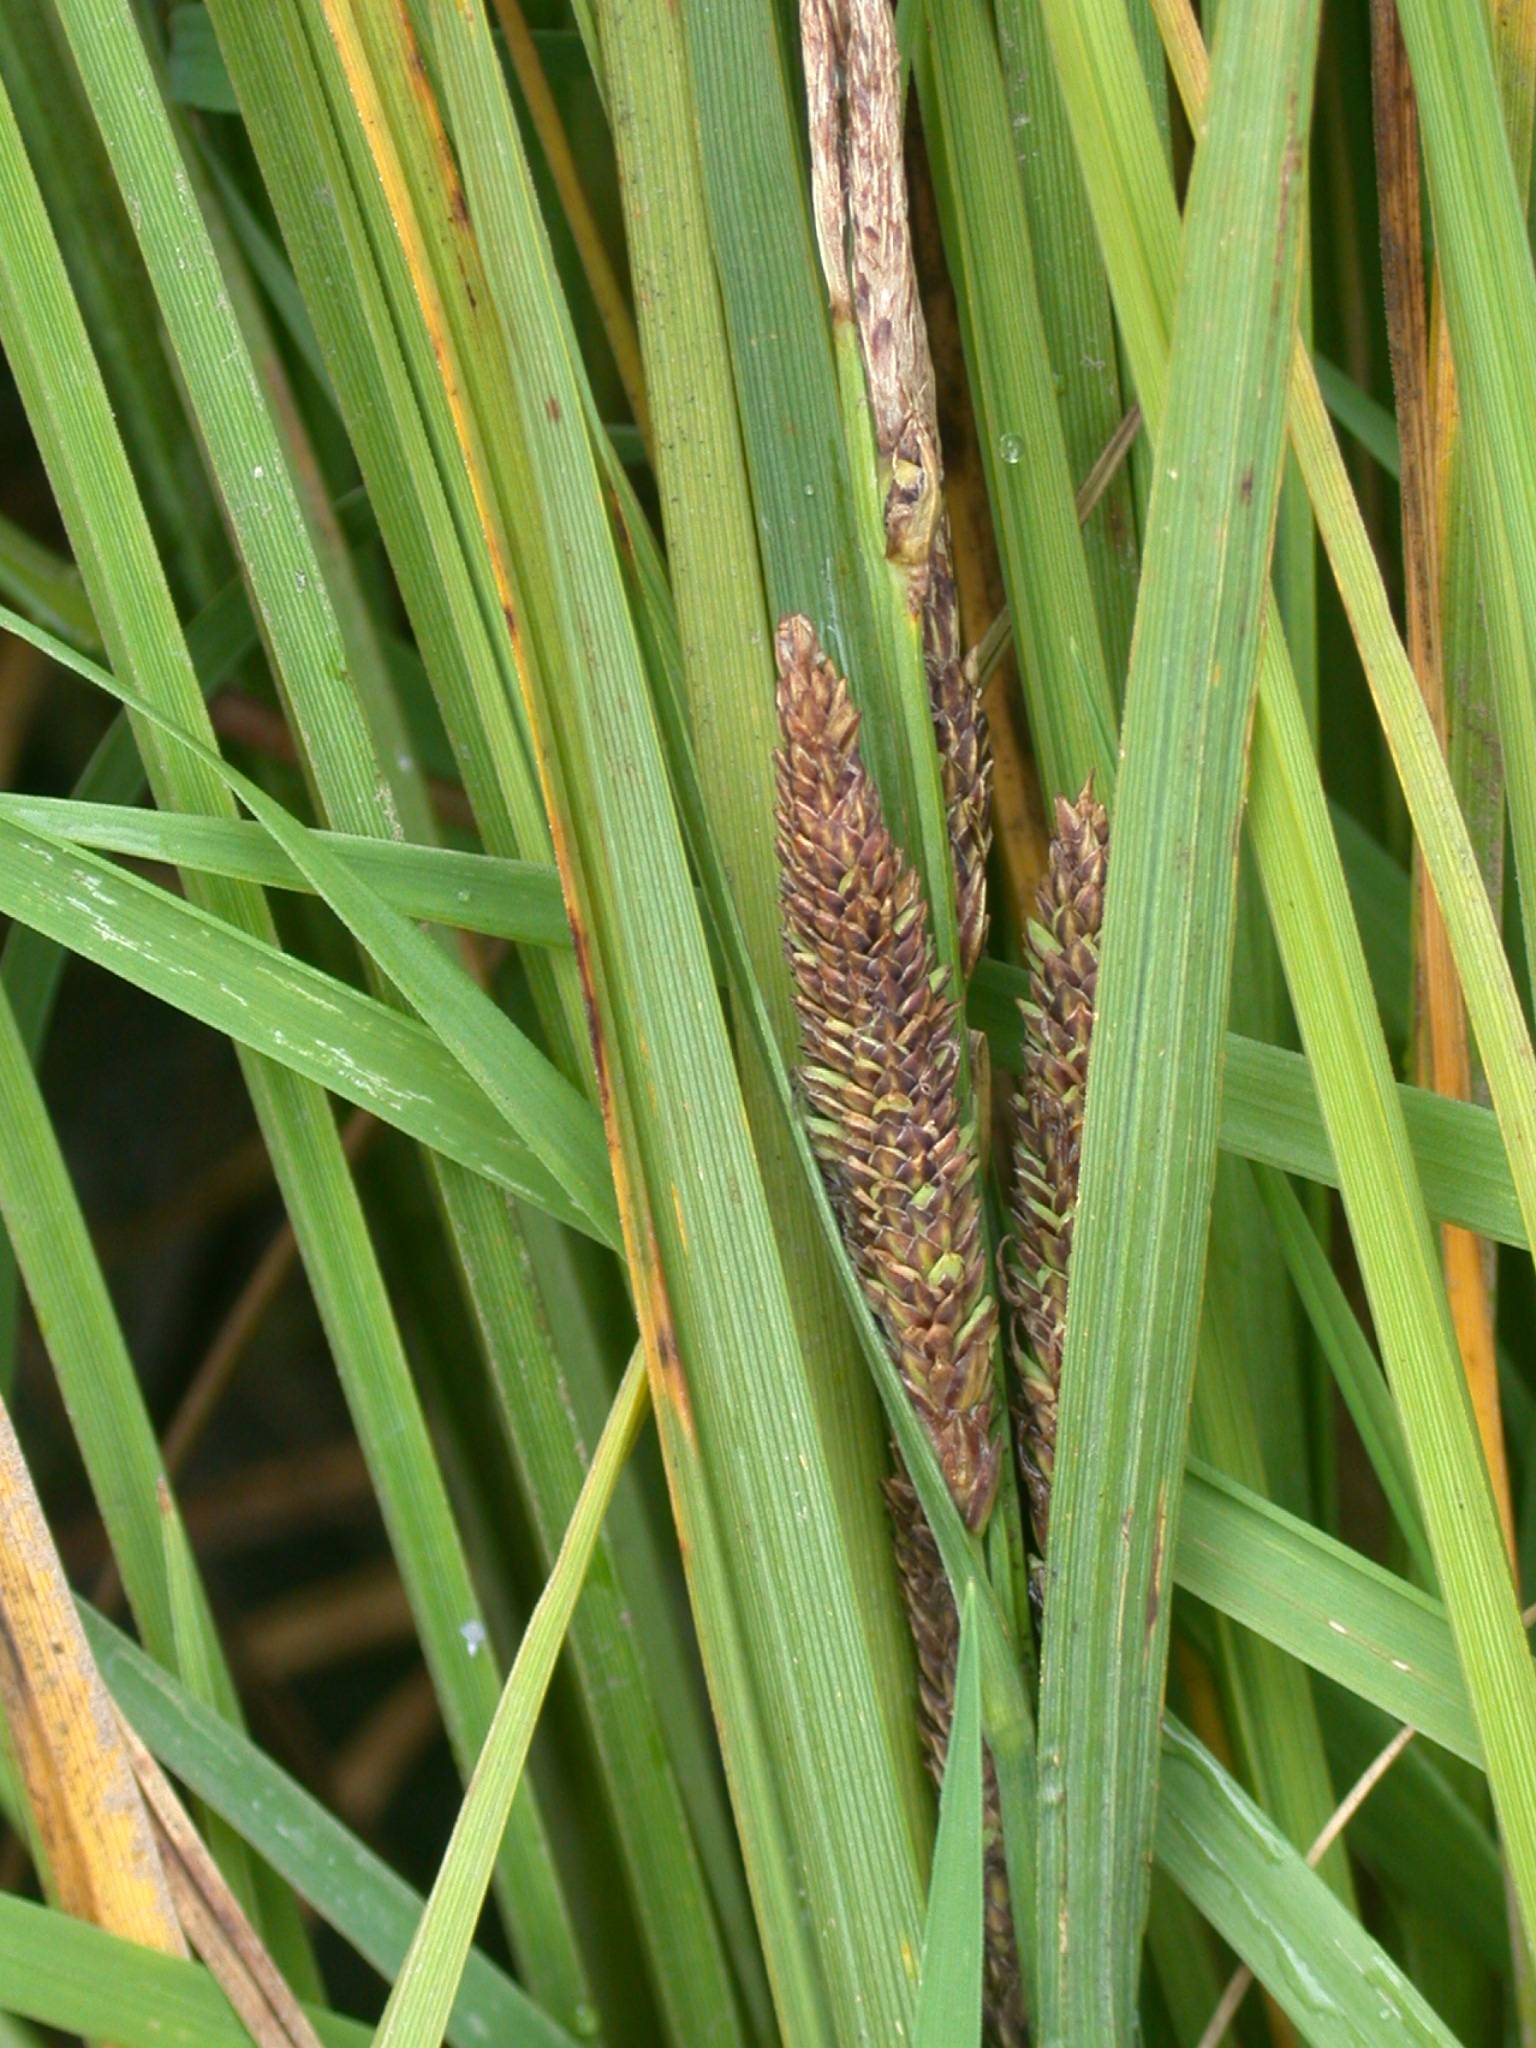 brown-lime spikelets with green-yellow foliage